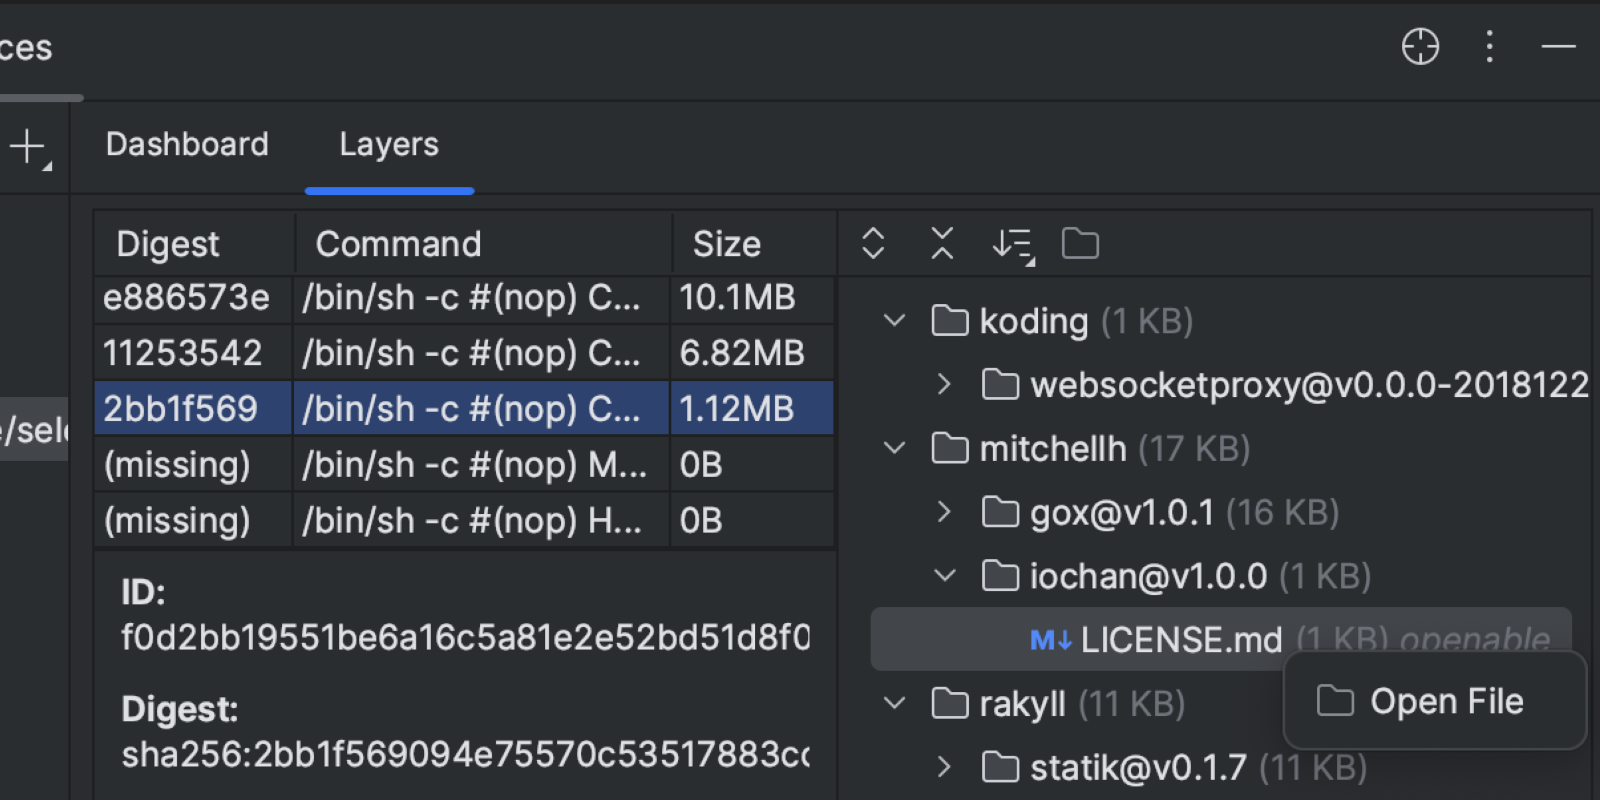 Showing the option to open file in the Docker services view